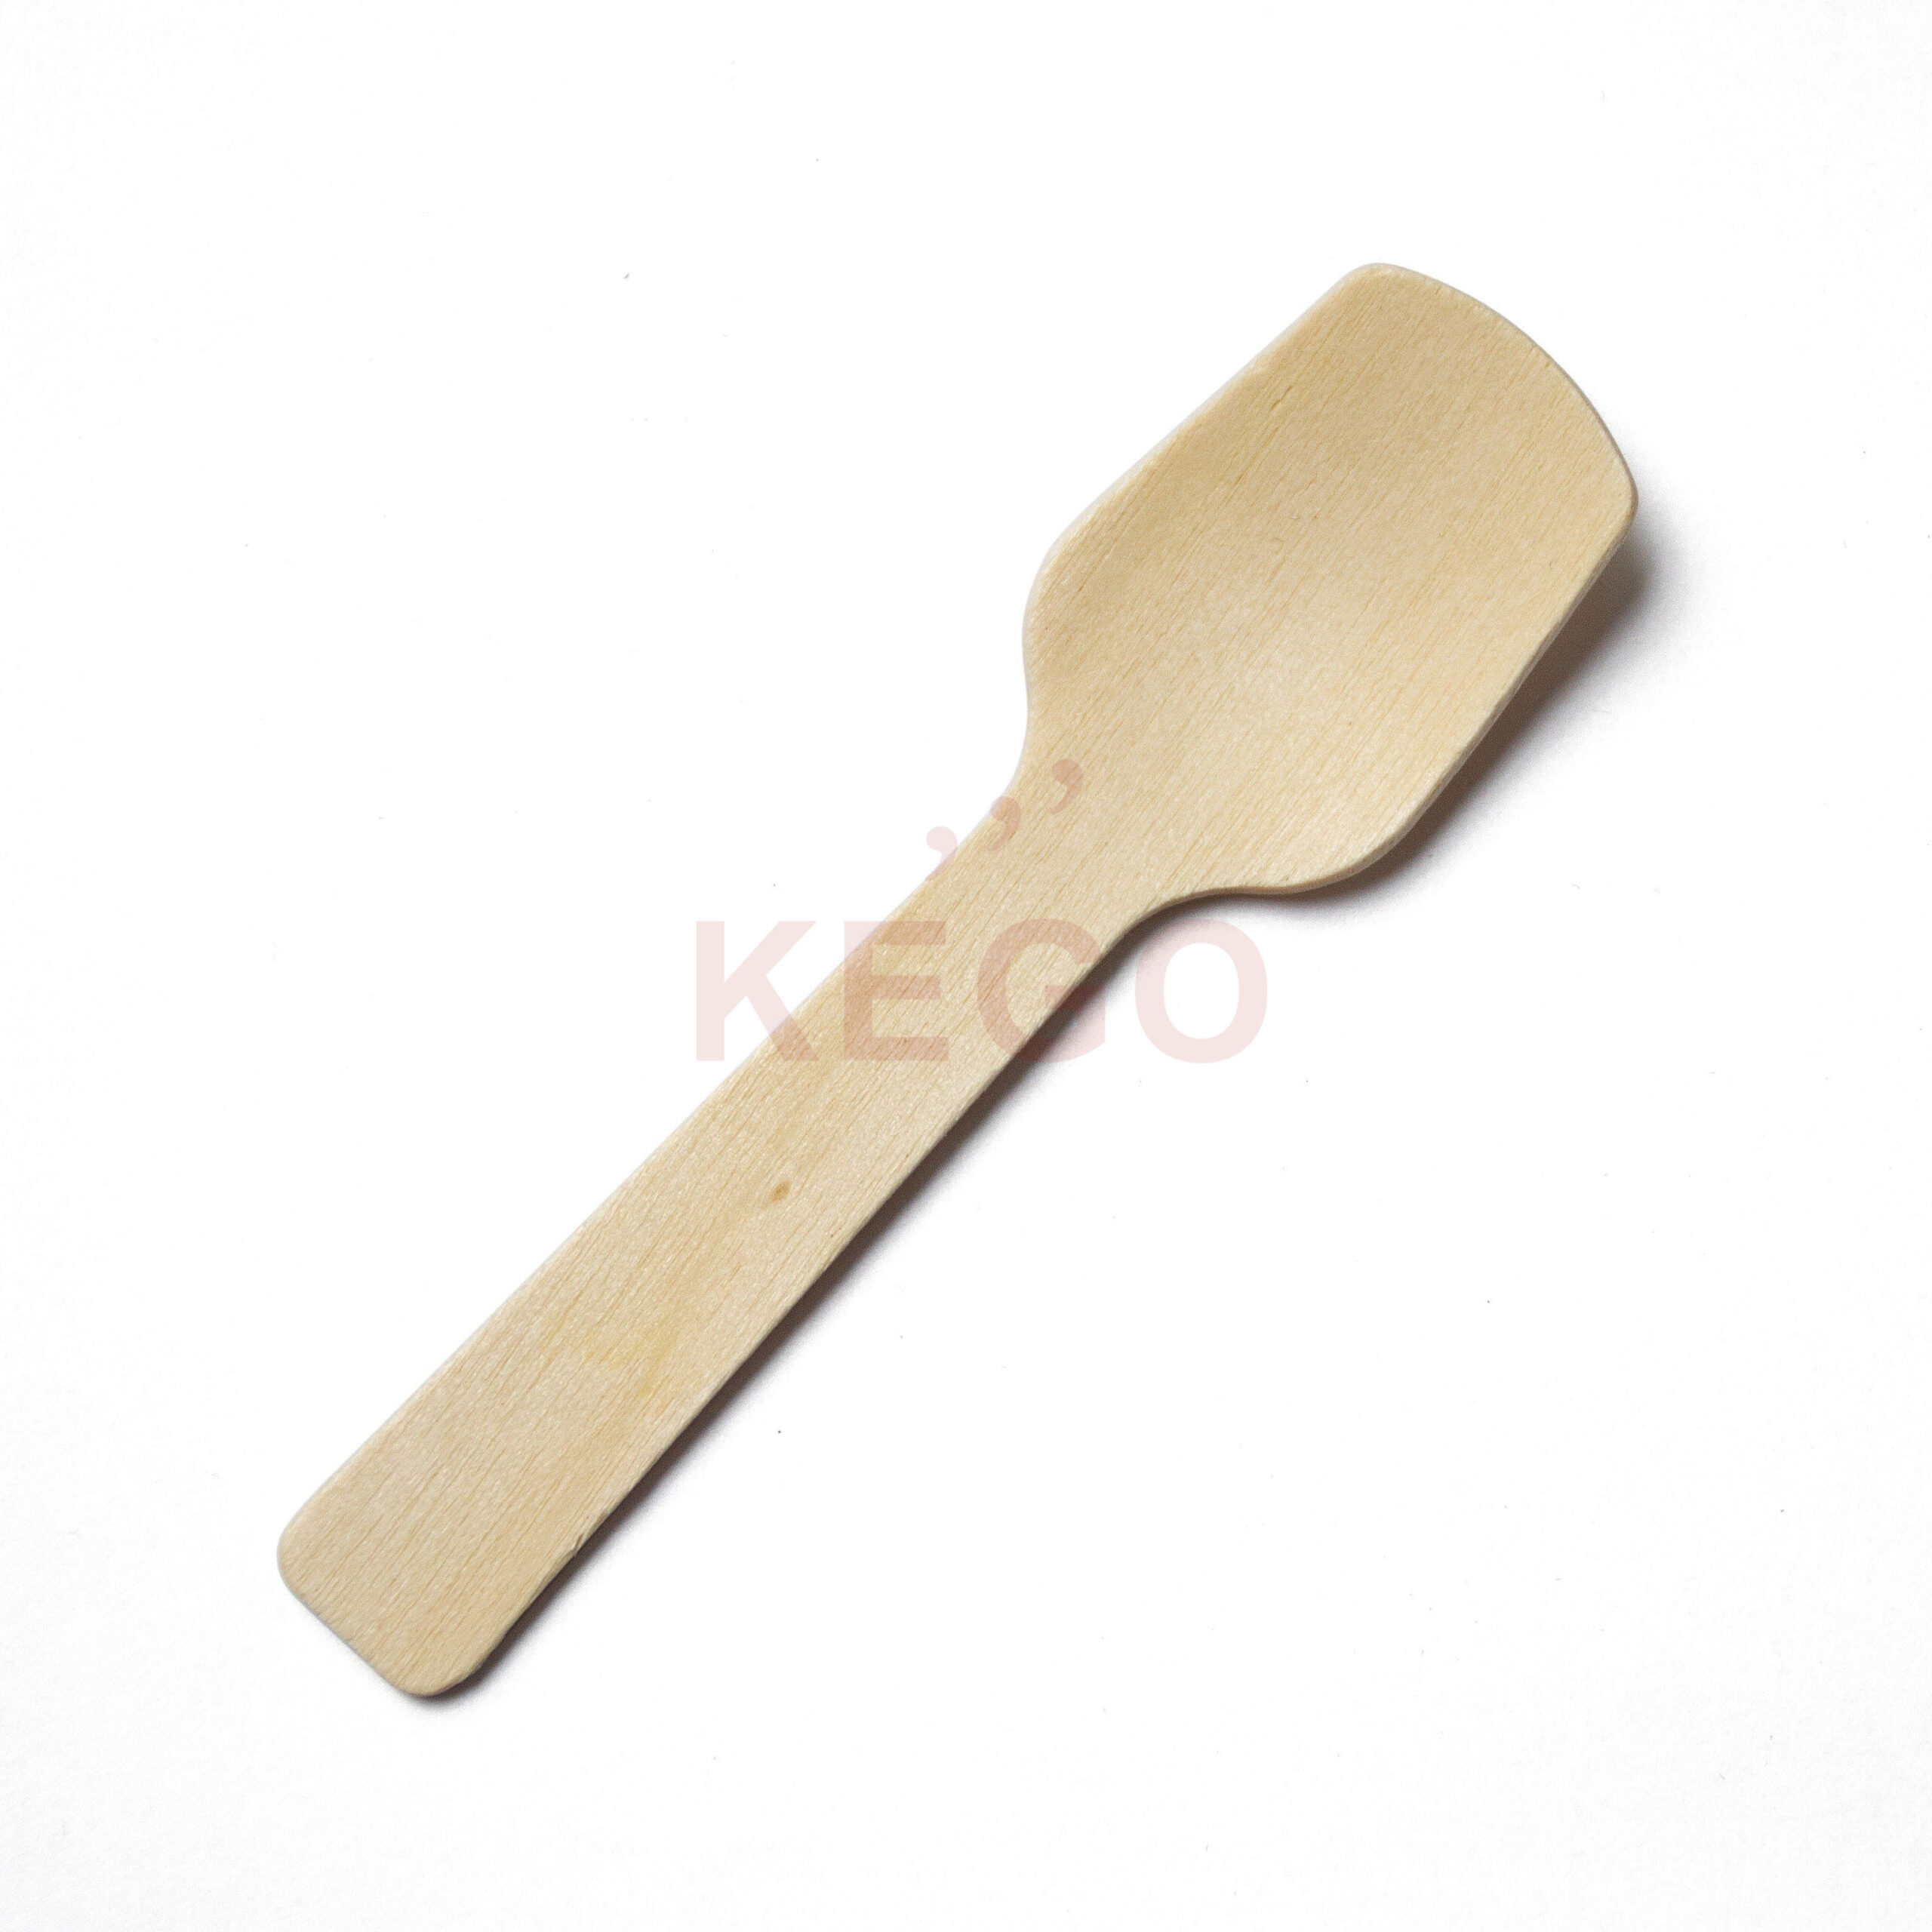 https://kego.vn/wp-content/uploads/2016/10/Disposable-Wooden-Spoon-95-3-scaled.jpg